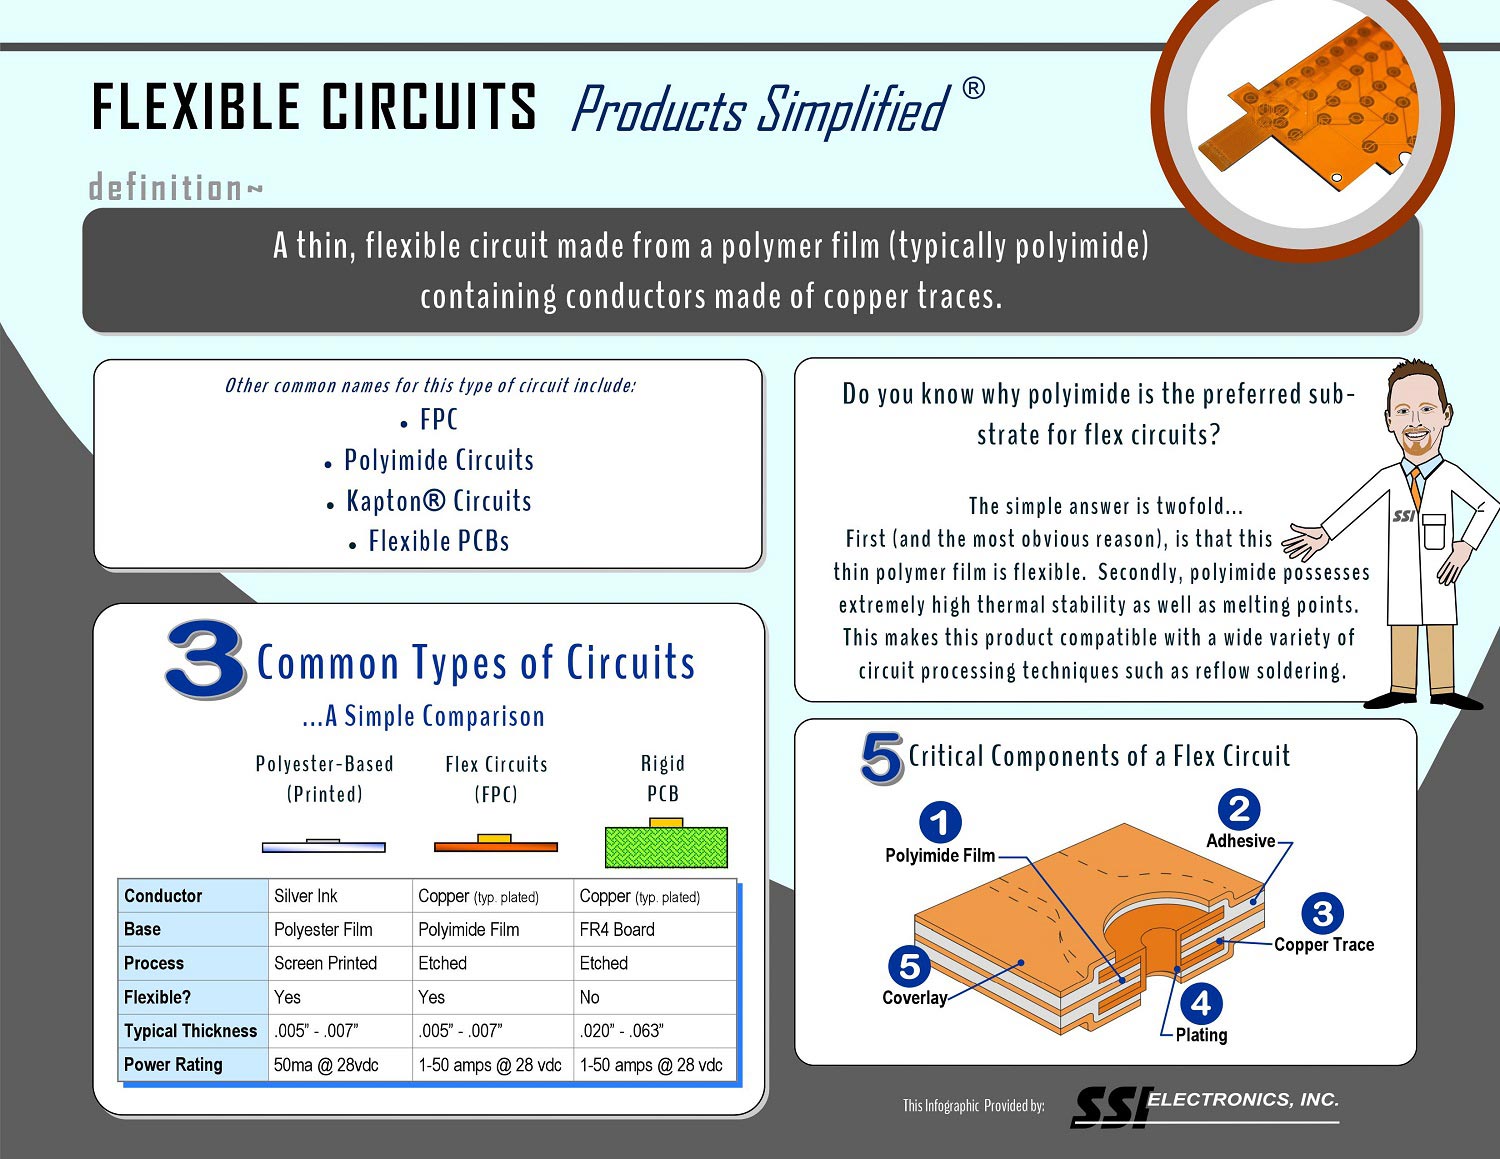 The overview of entitled Flexible Circuits Products Simplified and the types of flexible circuits.